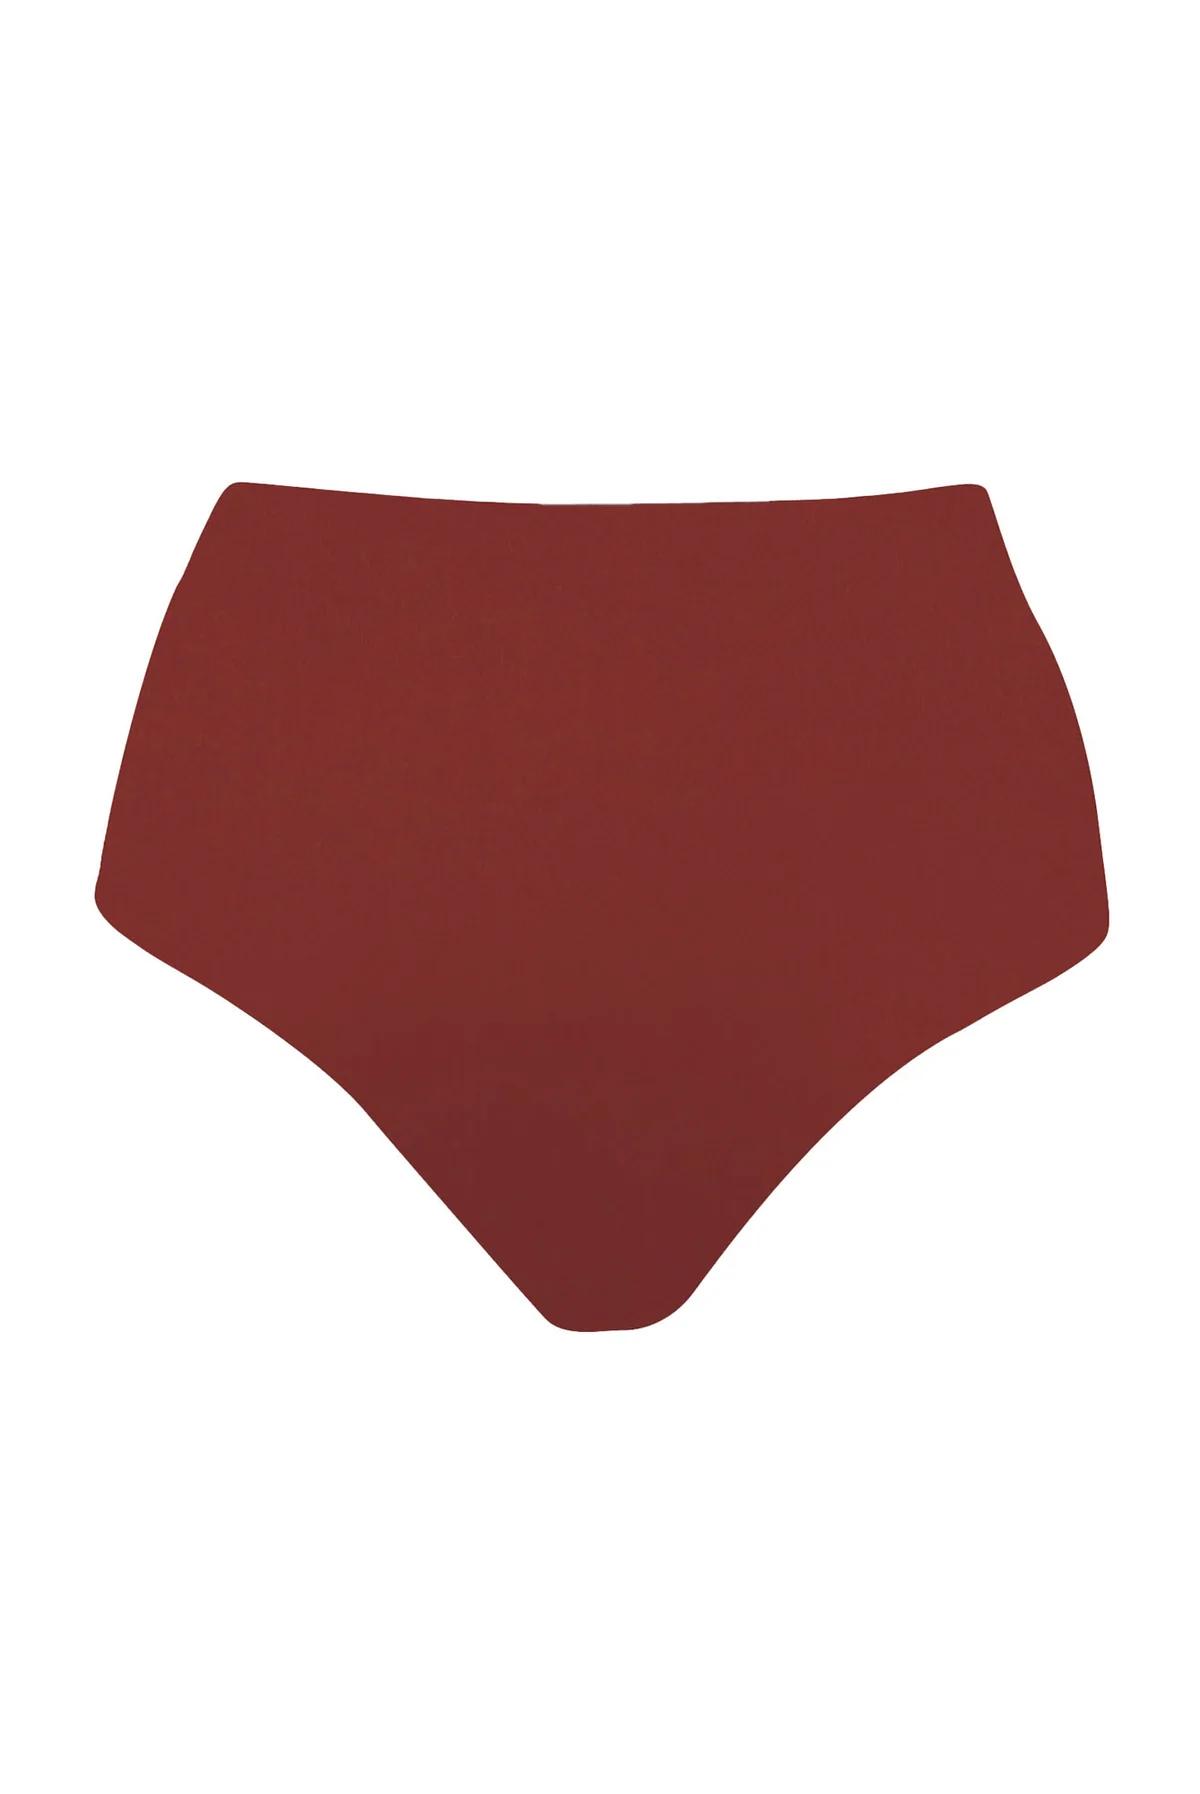 Product Image for High Waist Cheeky Bottom, Espresso